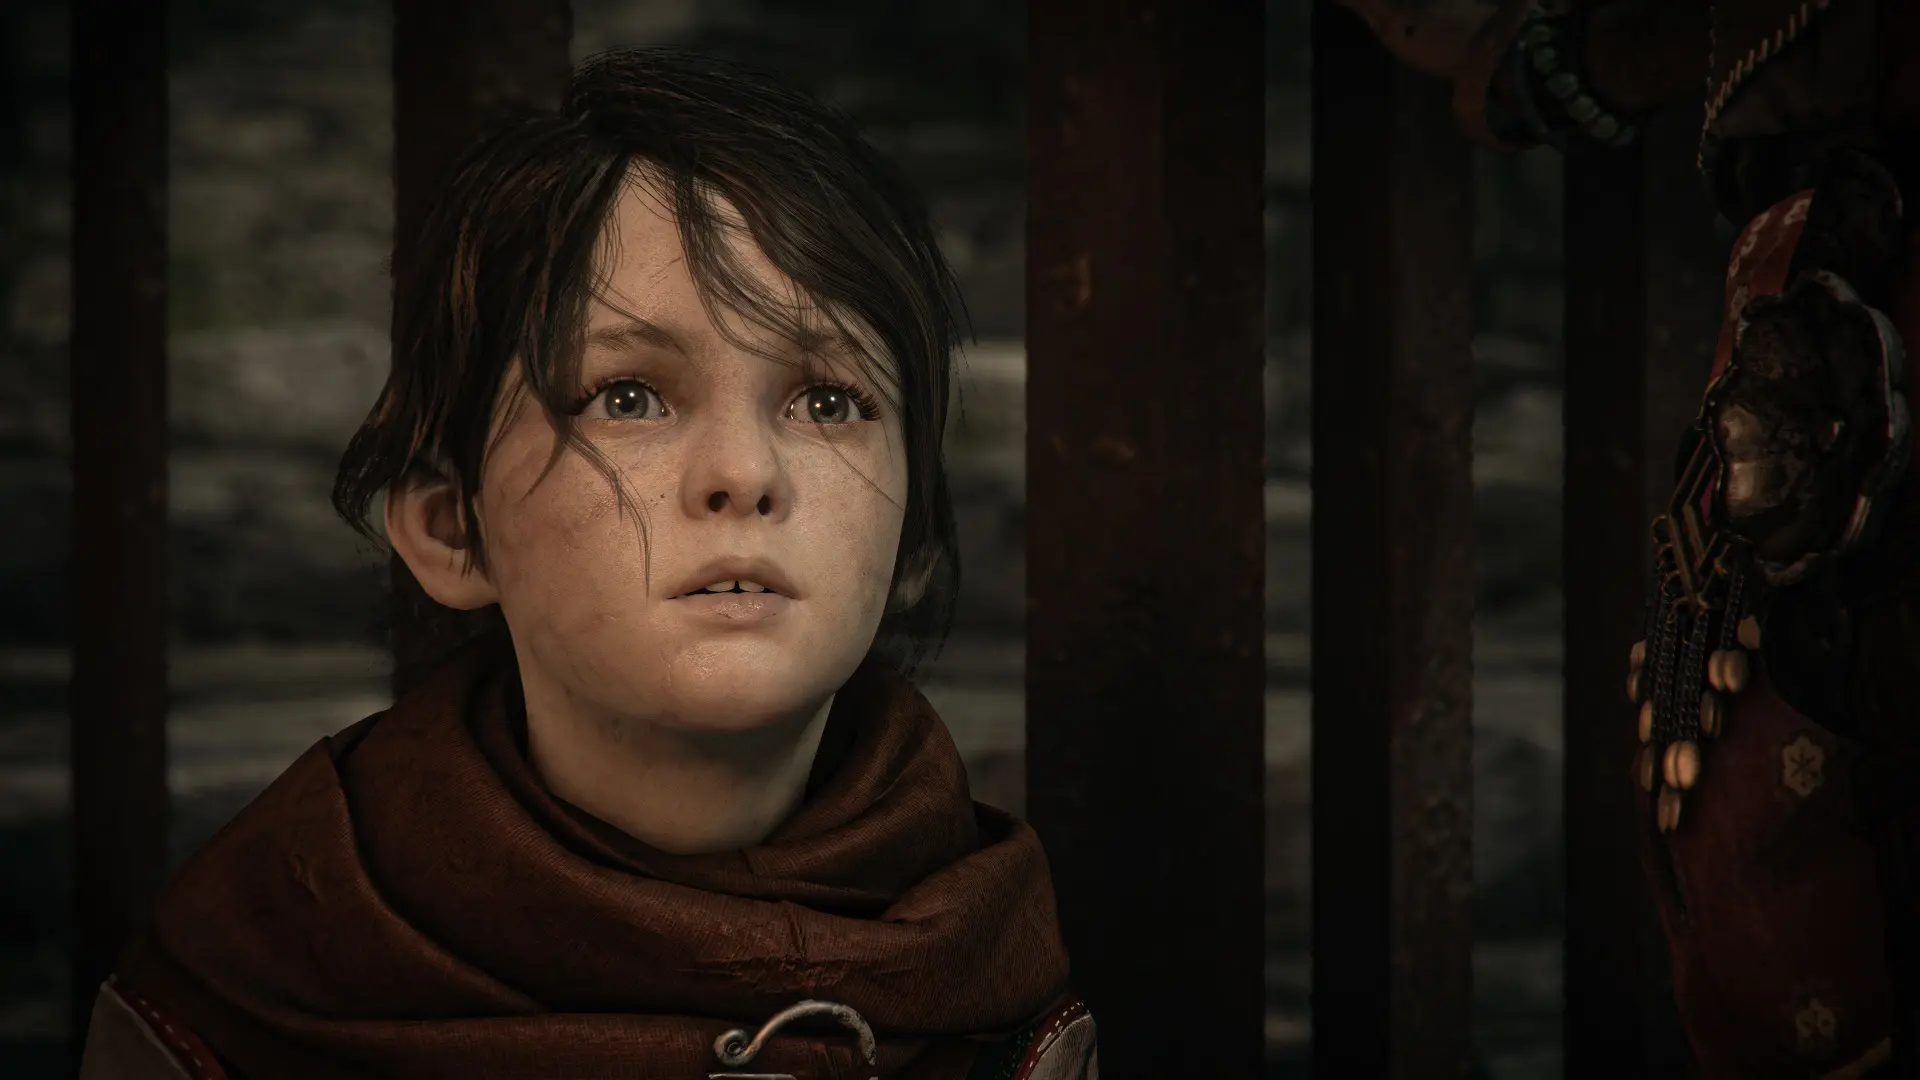 A Plague Tale: Requiem First Impressions: Love, Survival and Devastation - I present to you my first impressions of A Plague Tale: Requiem, Amicia and Hugo's return to the ring, a world ravaged by war, famine and plague.